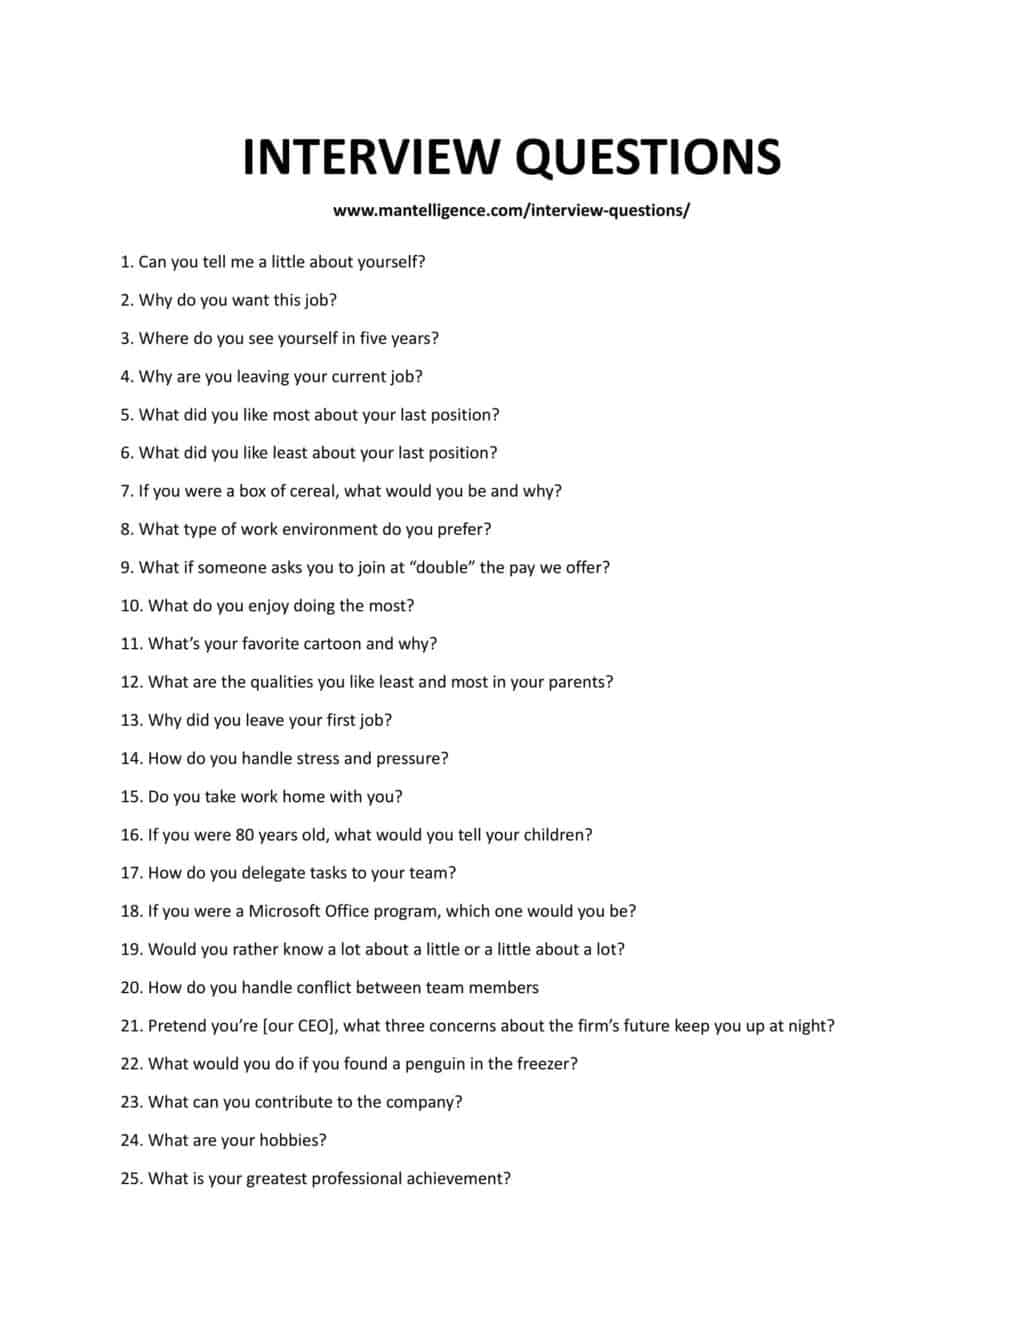 Downloadable And Printable List Of Interview Questions As JPG Or PDF 